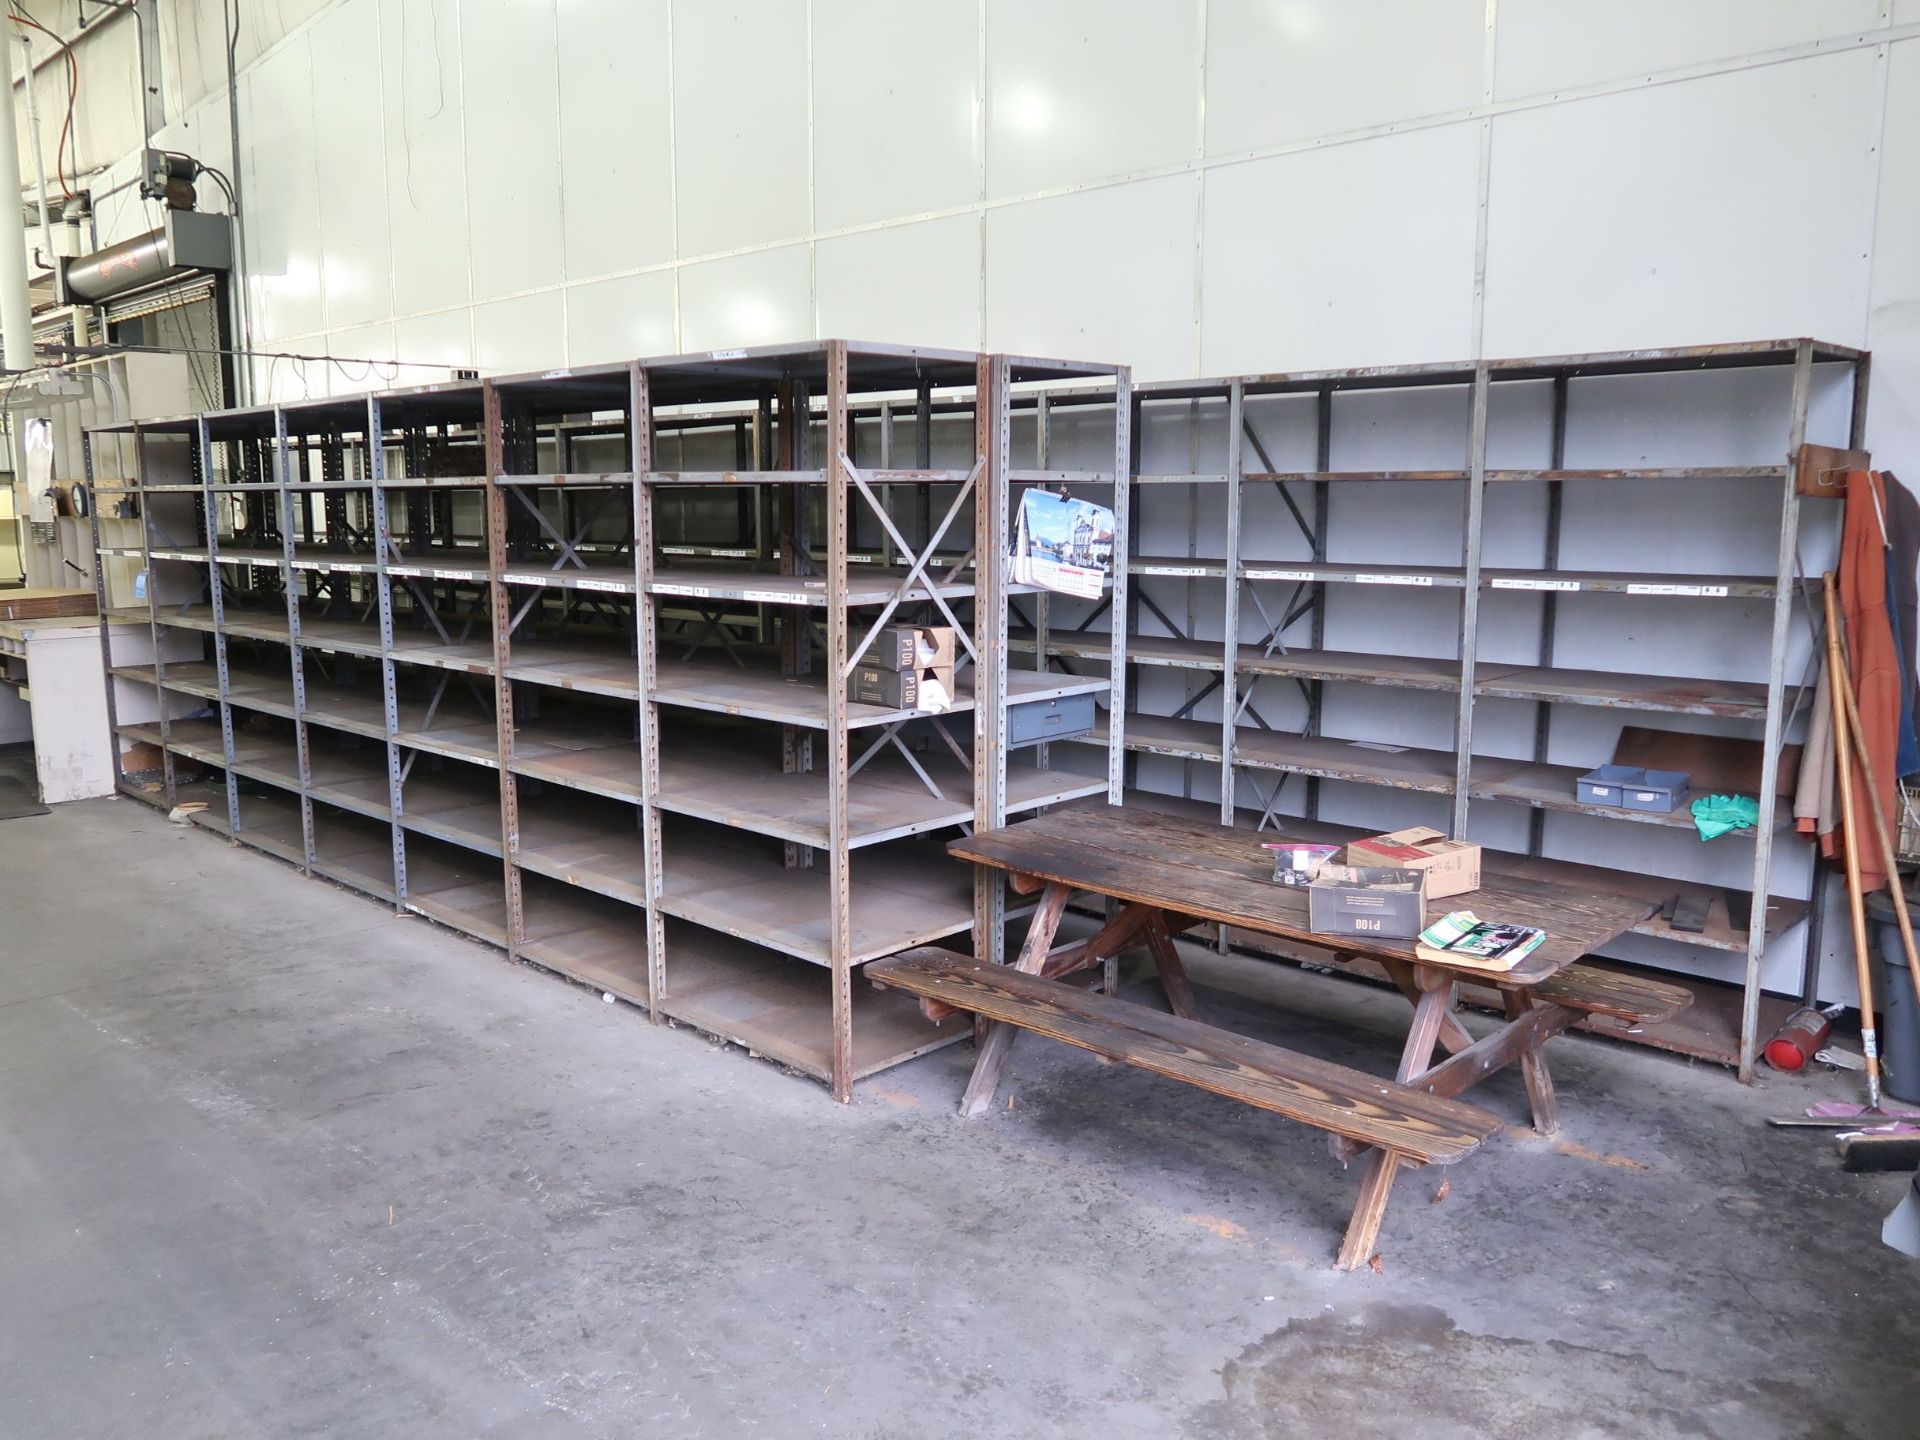 SECTIONS 24" X 36" X 85" STEEL SHELVES, (7) SHELVES PER SECTION